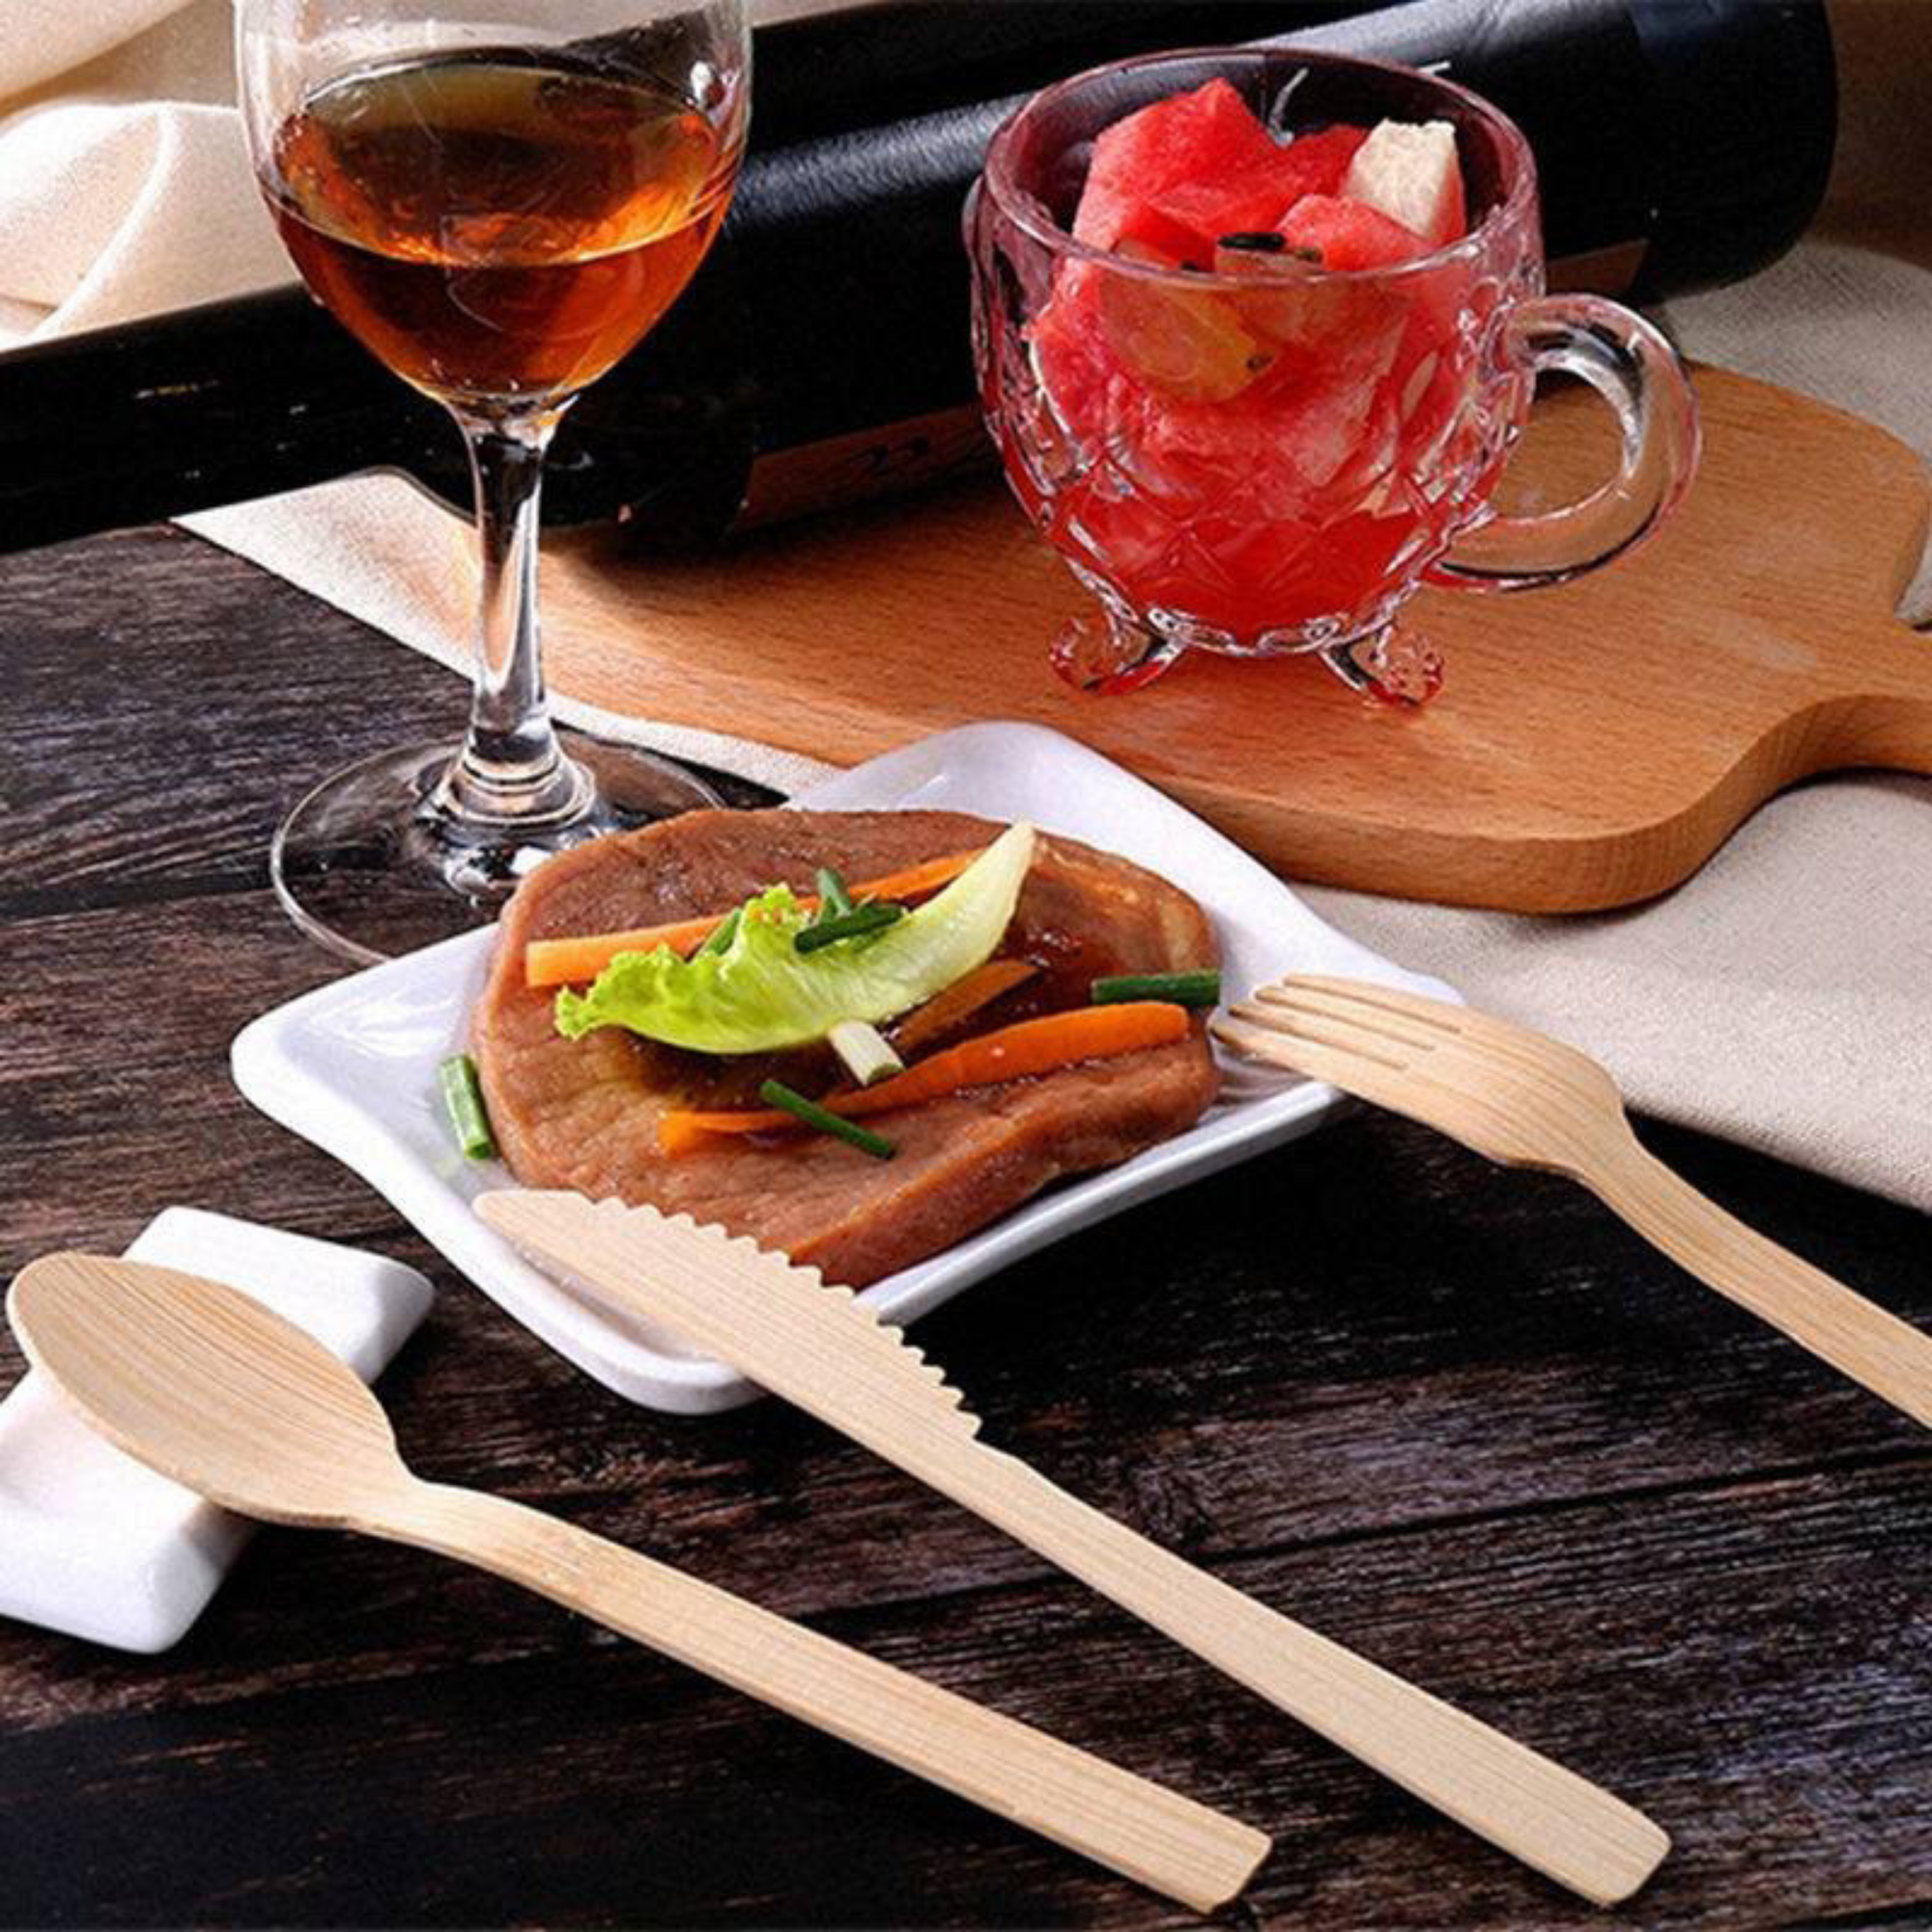 Compostable bamboo cutlery by Holy City Straw Co. arranged neatly on a table, alongside a white square plate containing a grilled steak garnished with a lettuce leaf and carrot sticks, with a stemmed glass of amber-colored liquid and a clear glass mug filled with fruit punch on a wooden serving board in the background